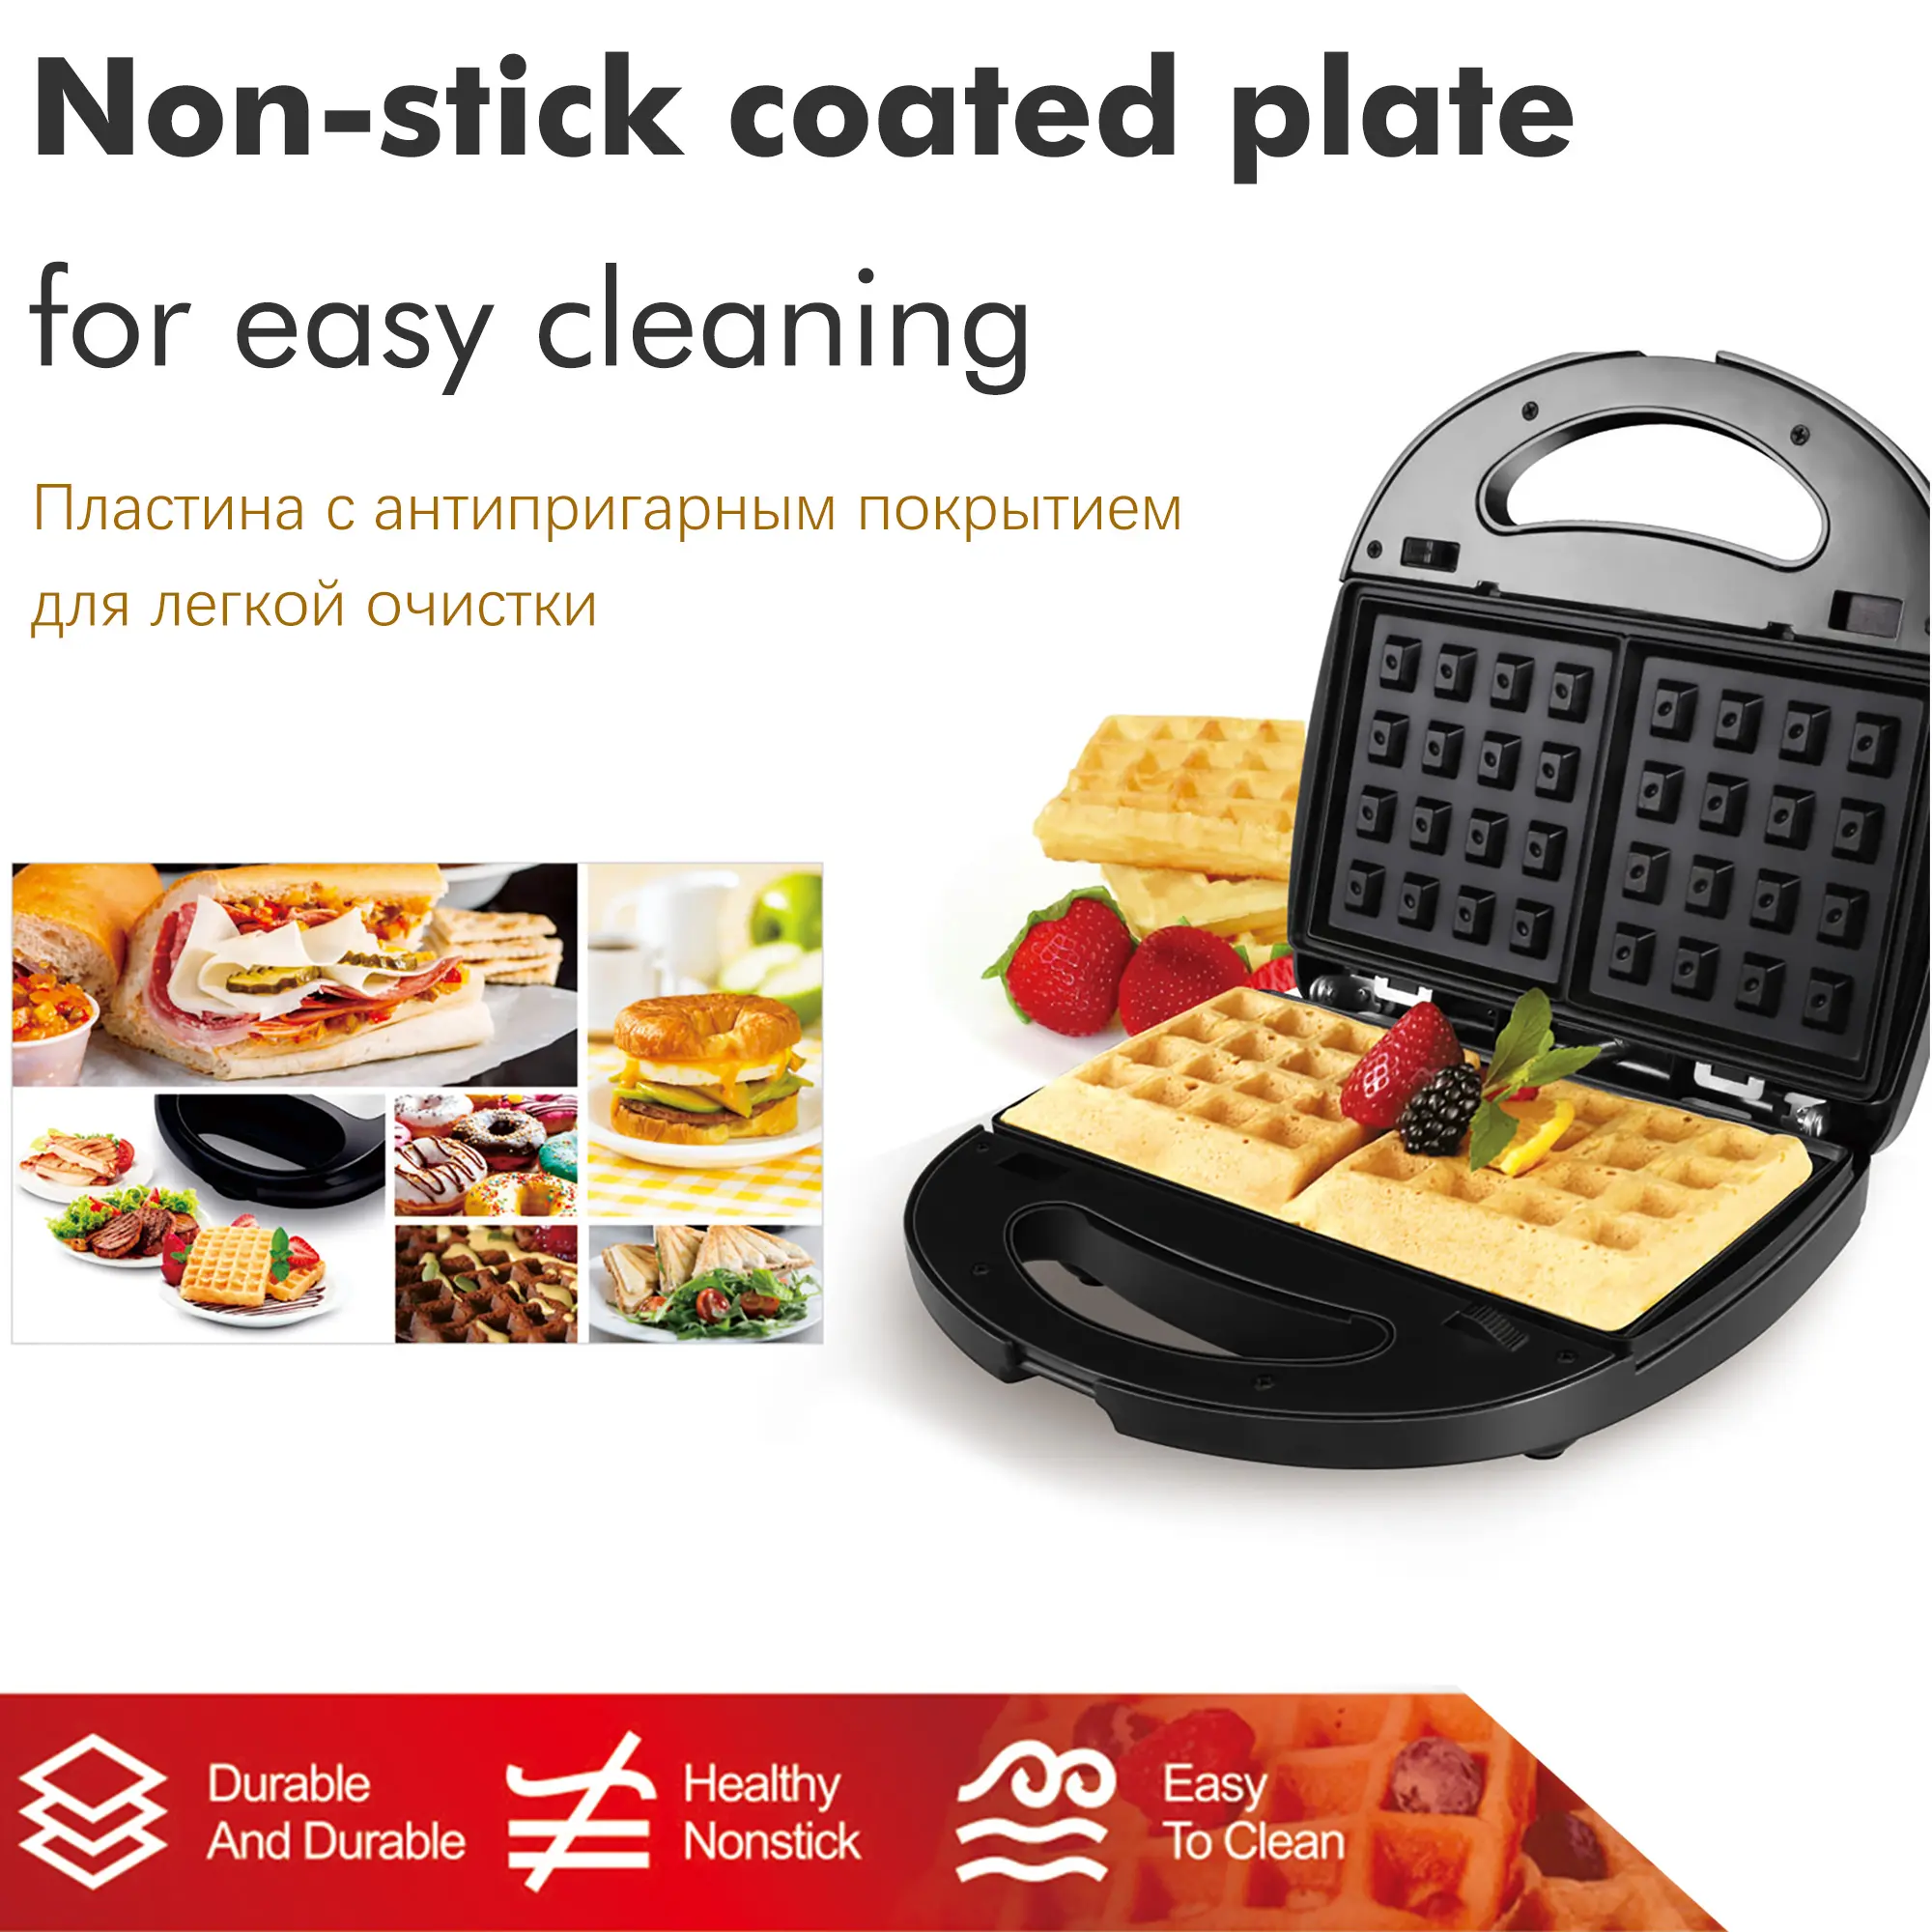 Sonifer 7 in 1 Breakfast Waffle and Sandwich Maker With 7 Sets of Detachable Non-stick Plates SF-6054